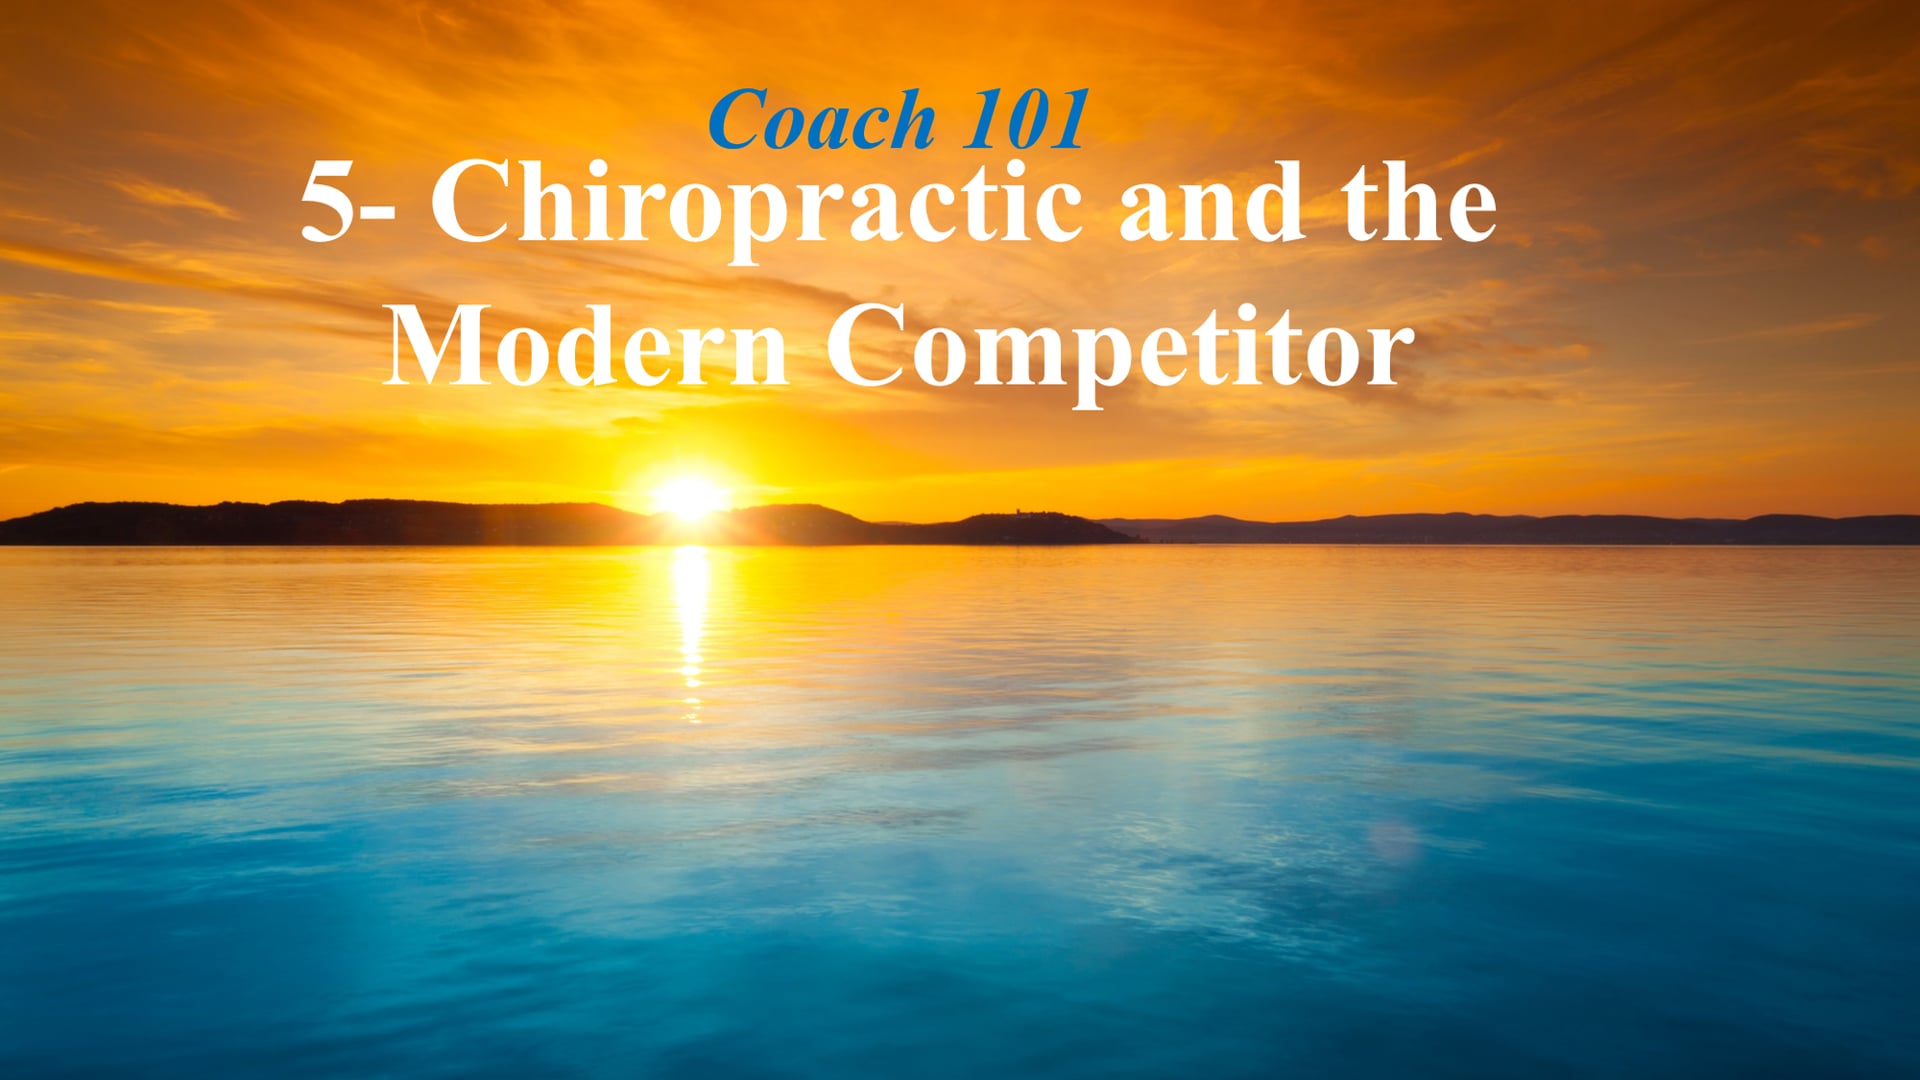 5- Chiropractic and the Modern Competitor